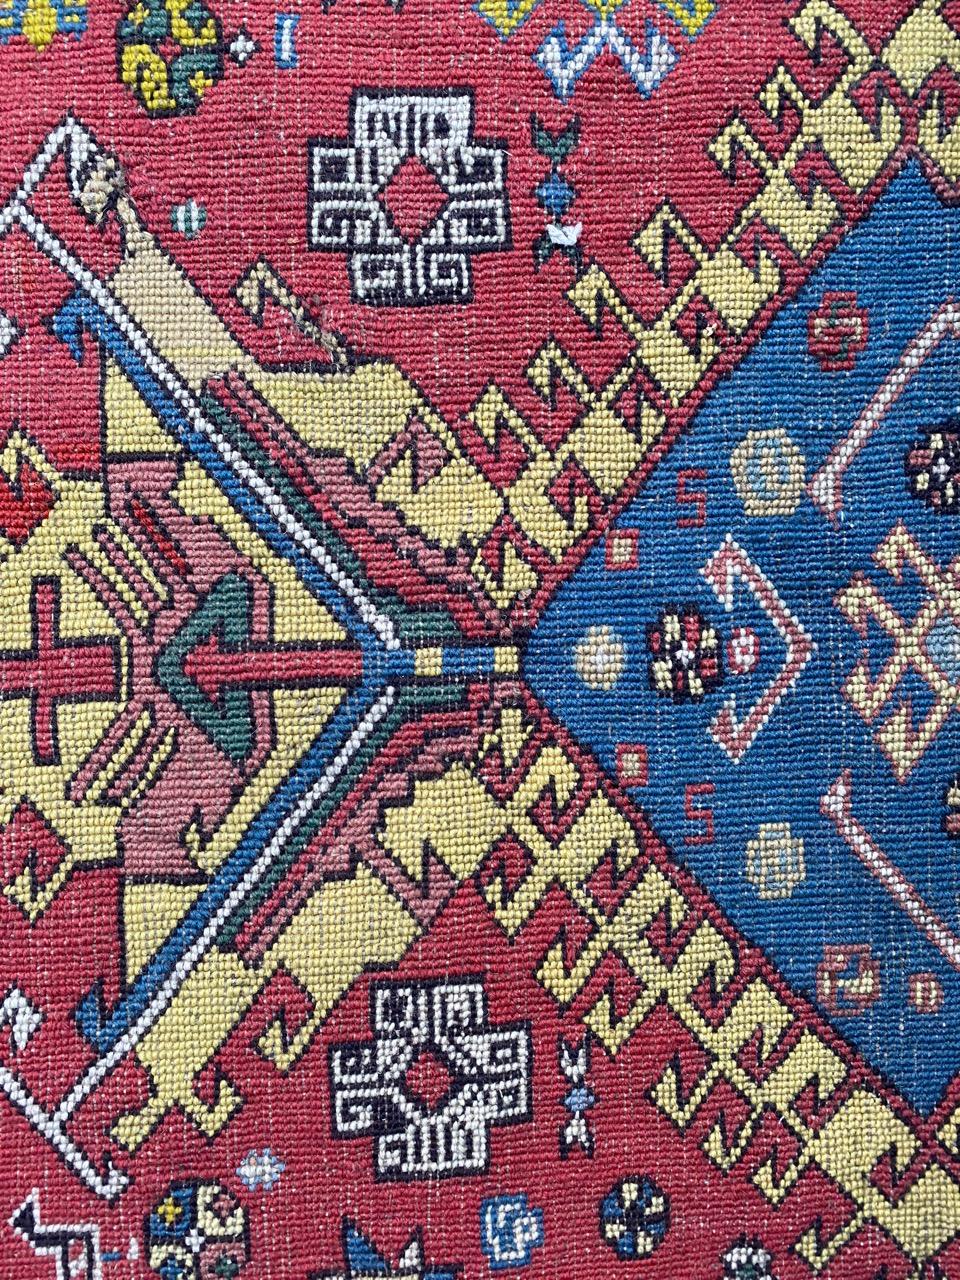 Bobyrug’s Extraordinary Unusual Antique Caucasian Needlepoint Embroidered Rug For Sale 5